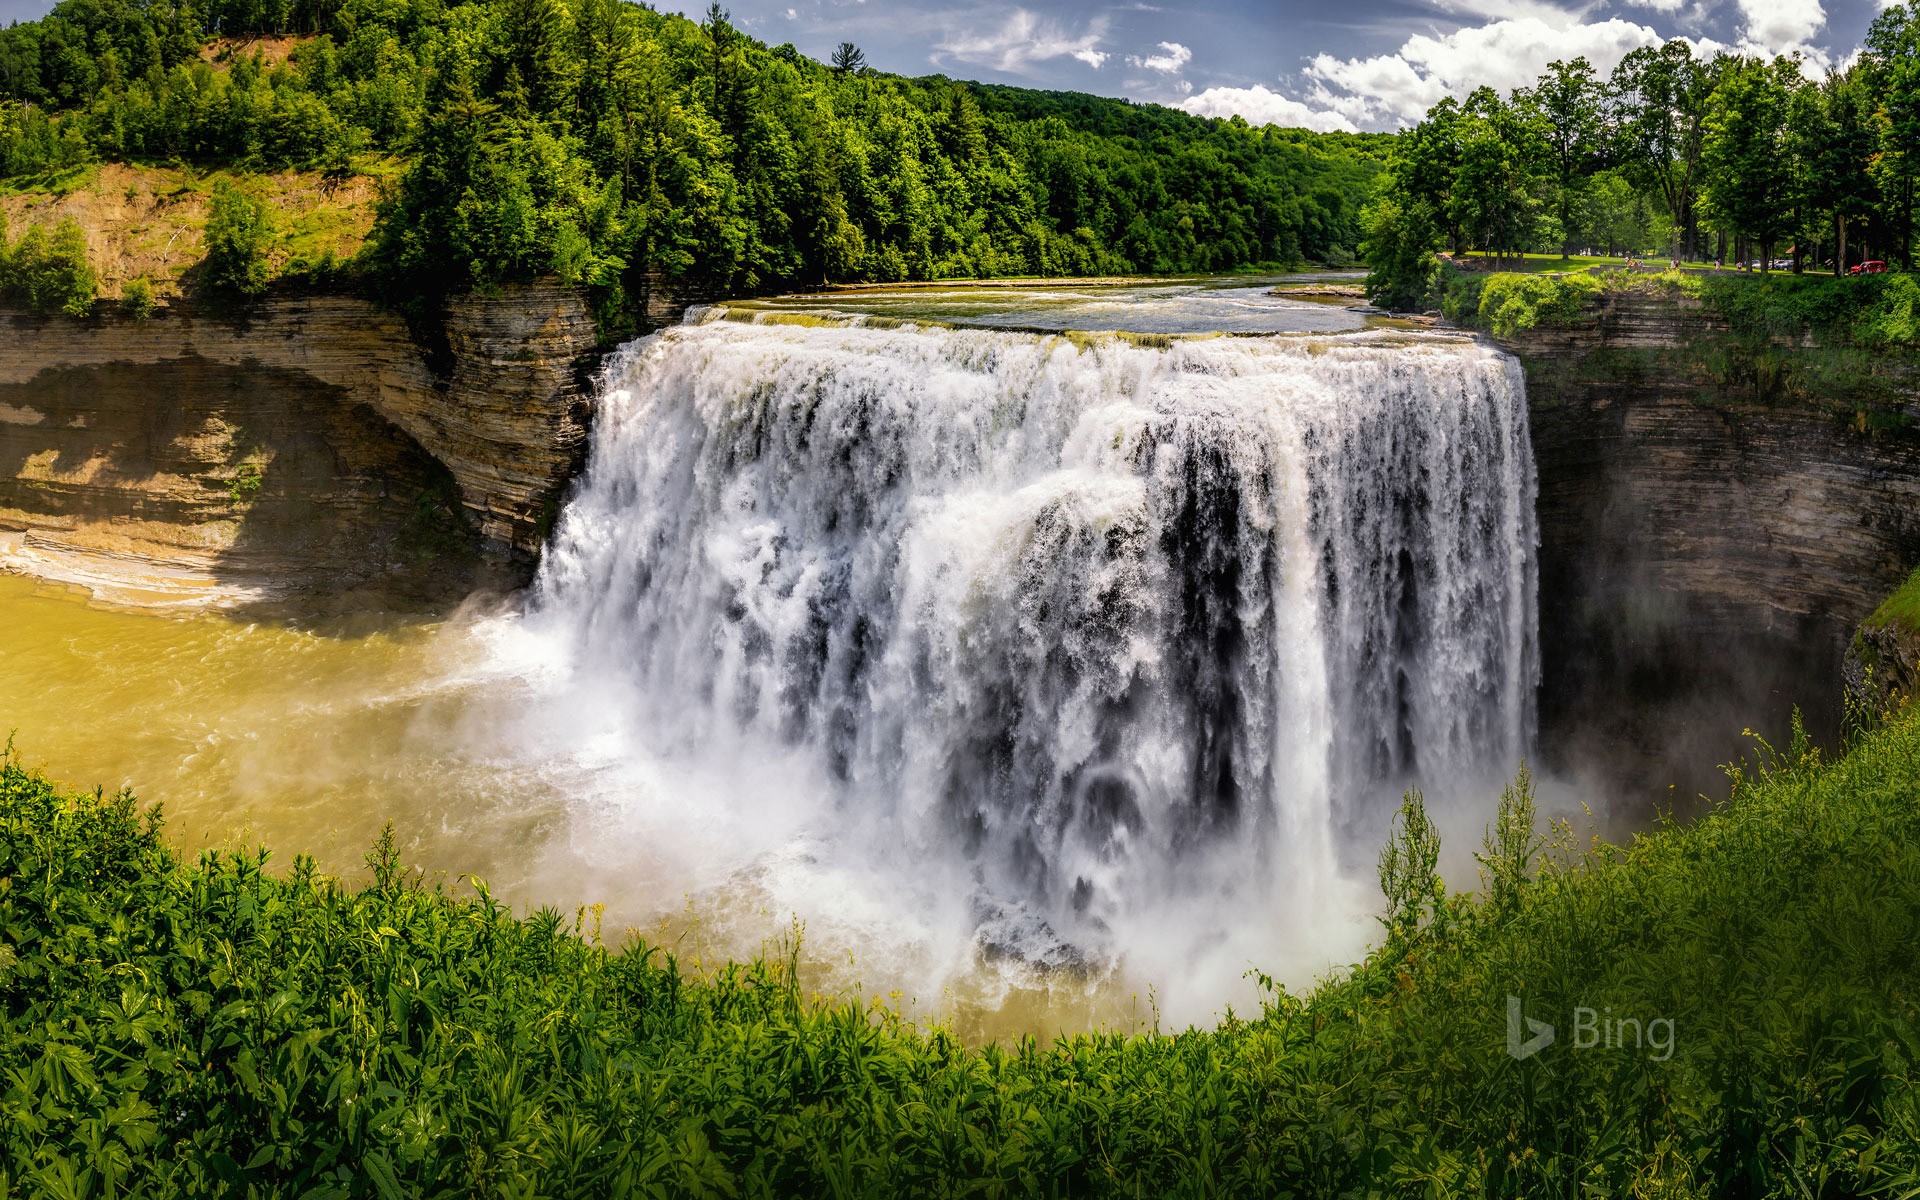 Middle Falls at Letchworth State Park, New York